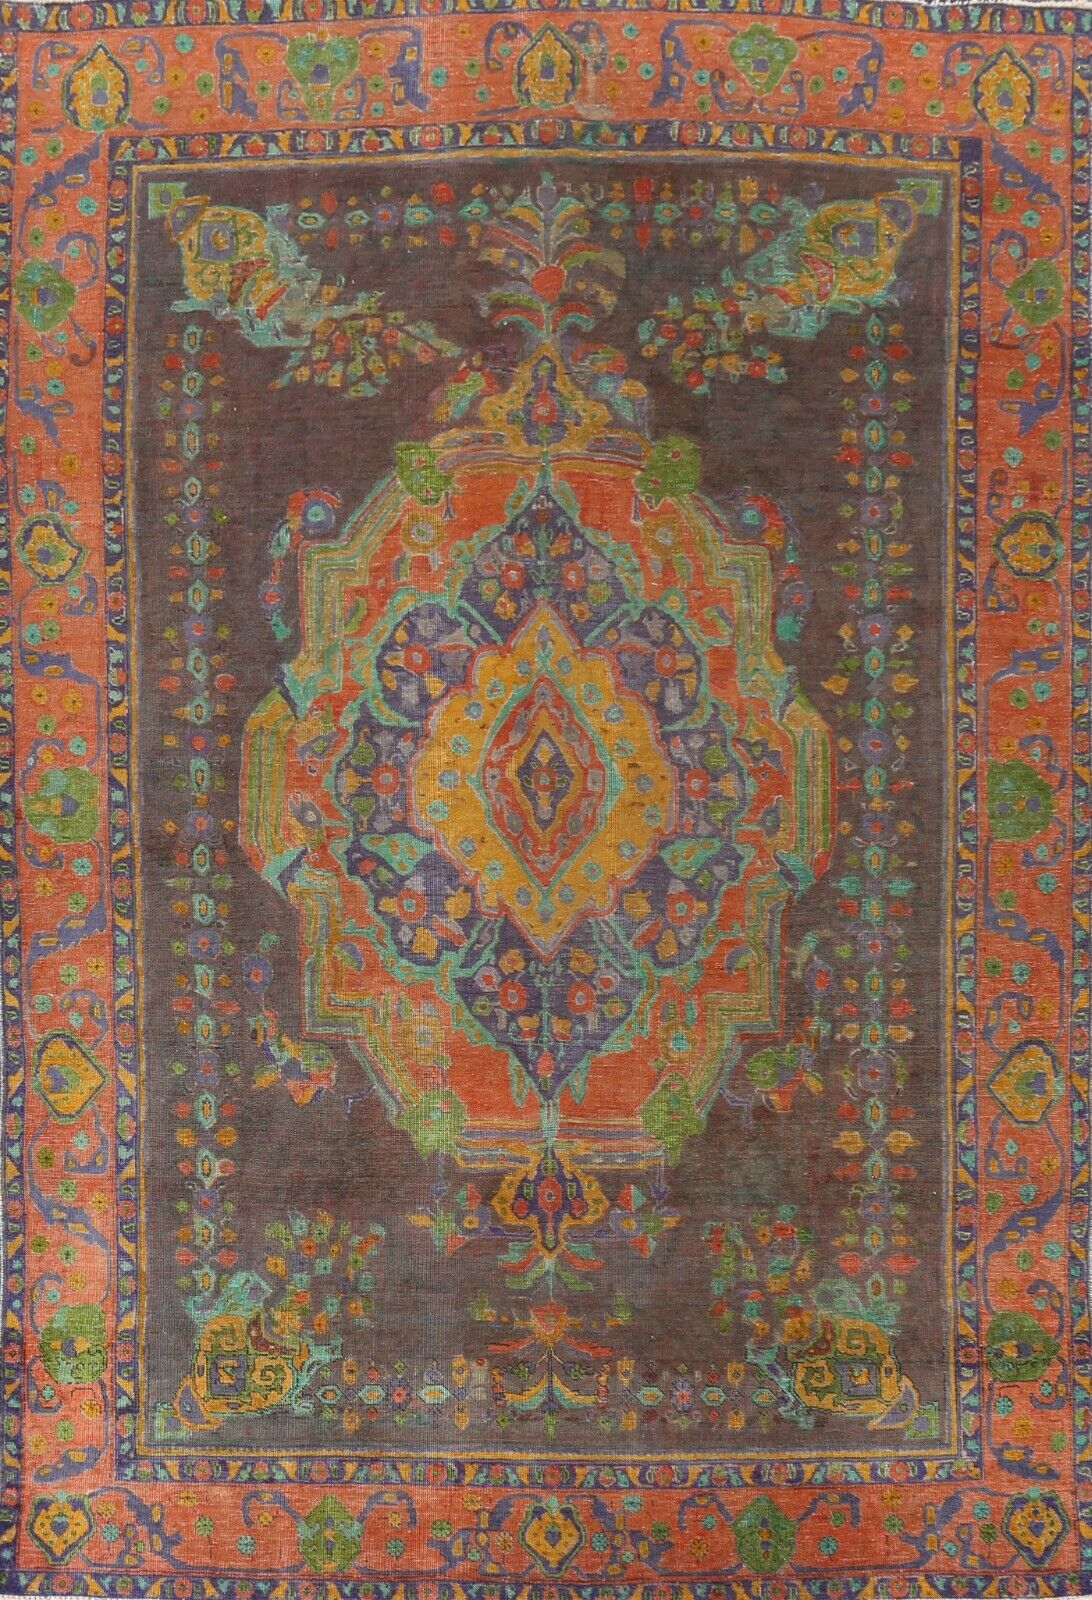 Geometric Semi-Antique Overdyed Traditional Oriental Area Rug Hand-knotted 8x11